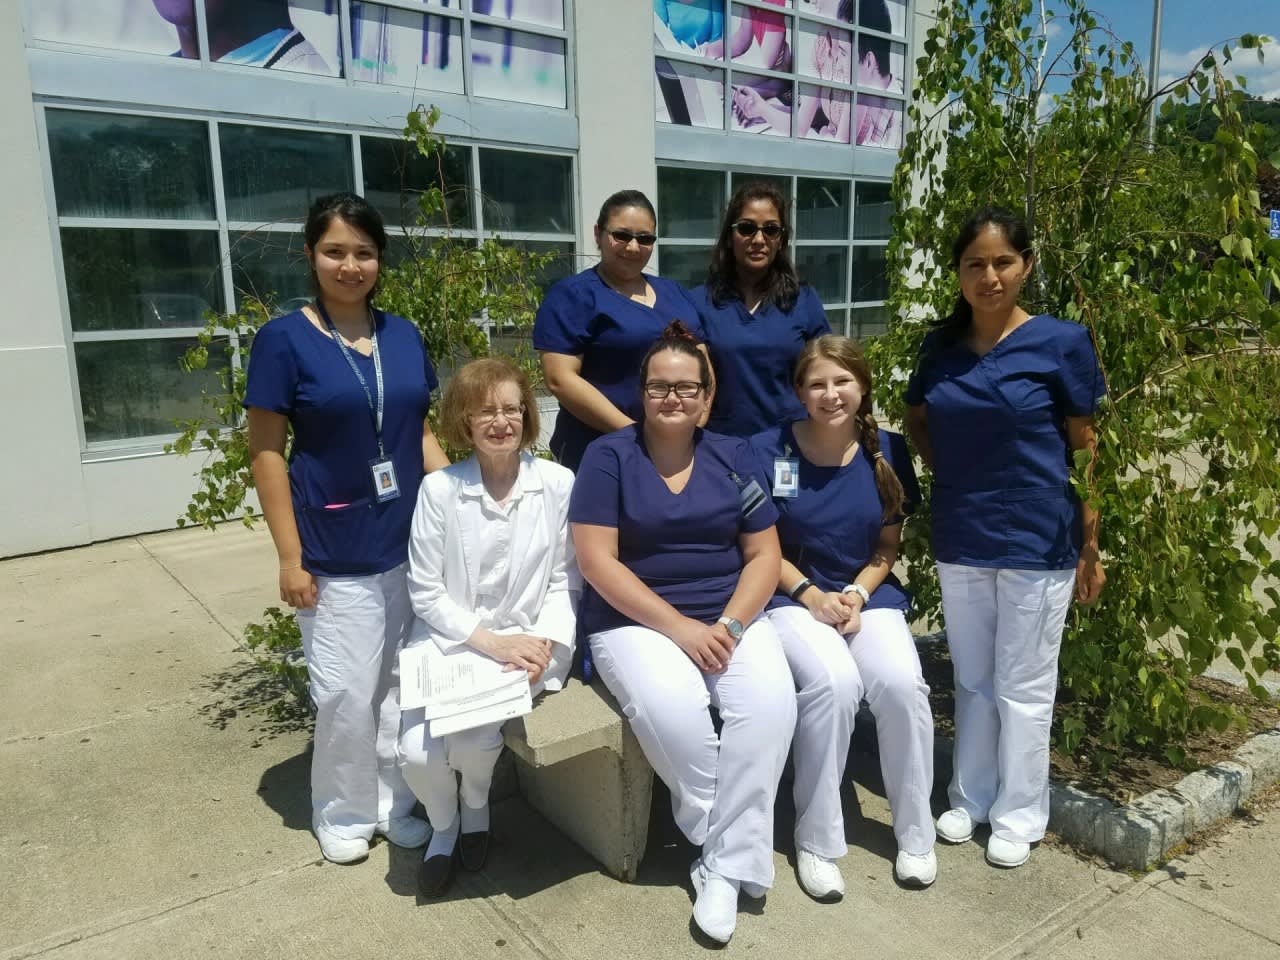 Certified Nurse Assitant (CNA) students at Westchester Community College.